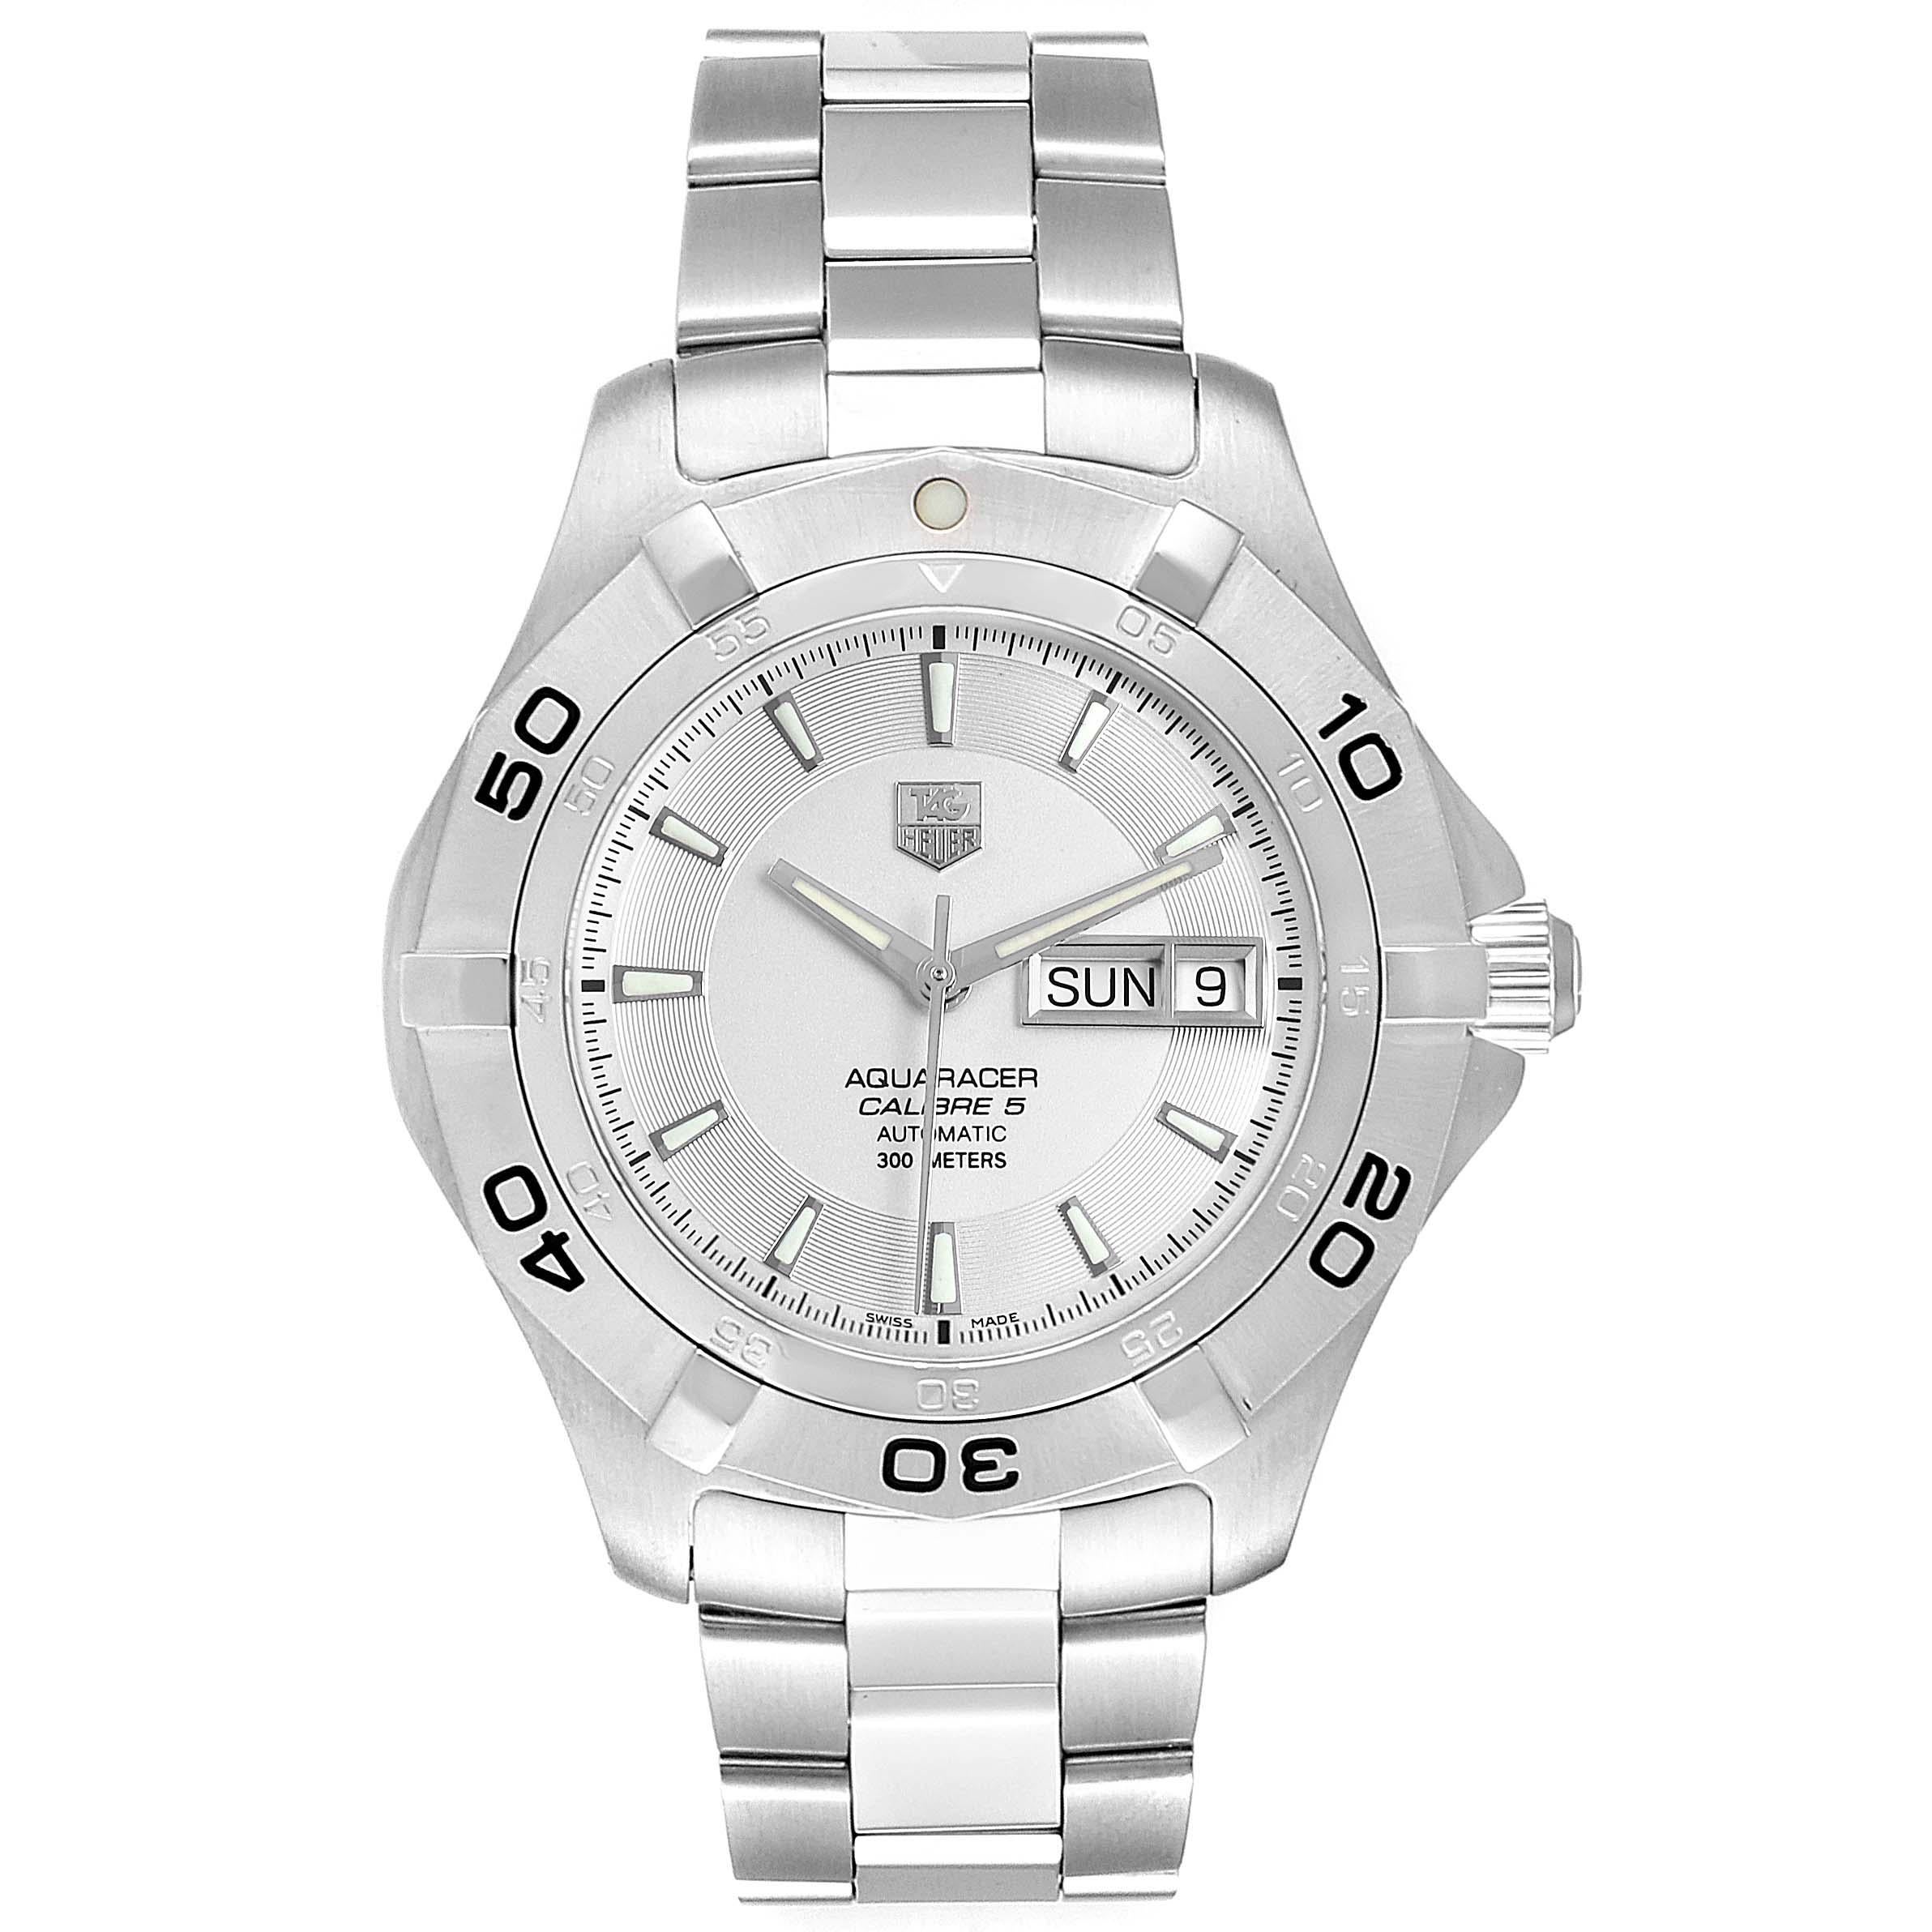 Tag Heuer Aquaracer 41mm Silver Dial Steel Mens Watch WAF2011 Box Card. Automatic self-winding movement. Stainless steel case 41.0 mm in diameter. Steel unidirectional rotating bezel. Scratch resistant sapphire crystal. Silver dial with luminous